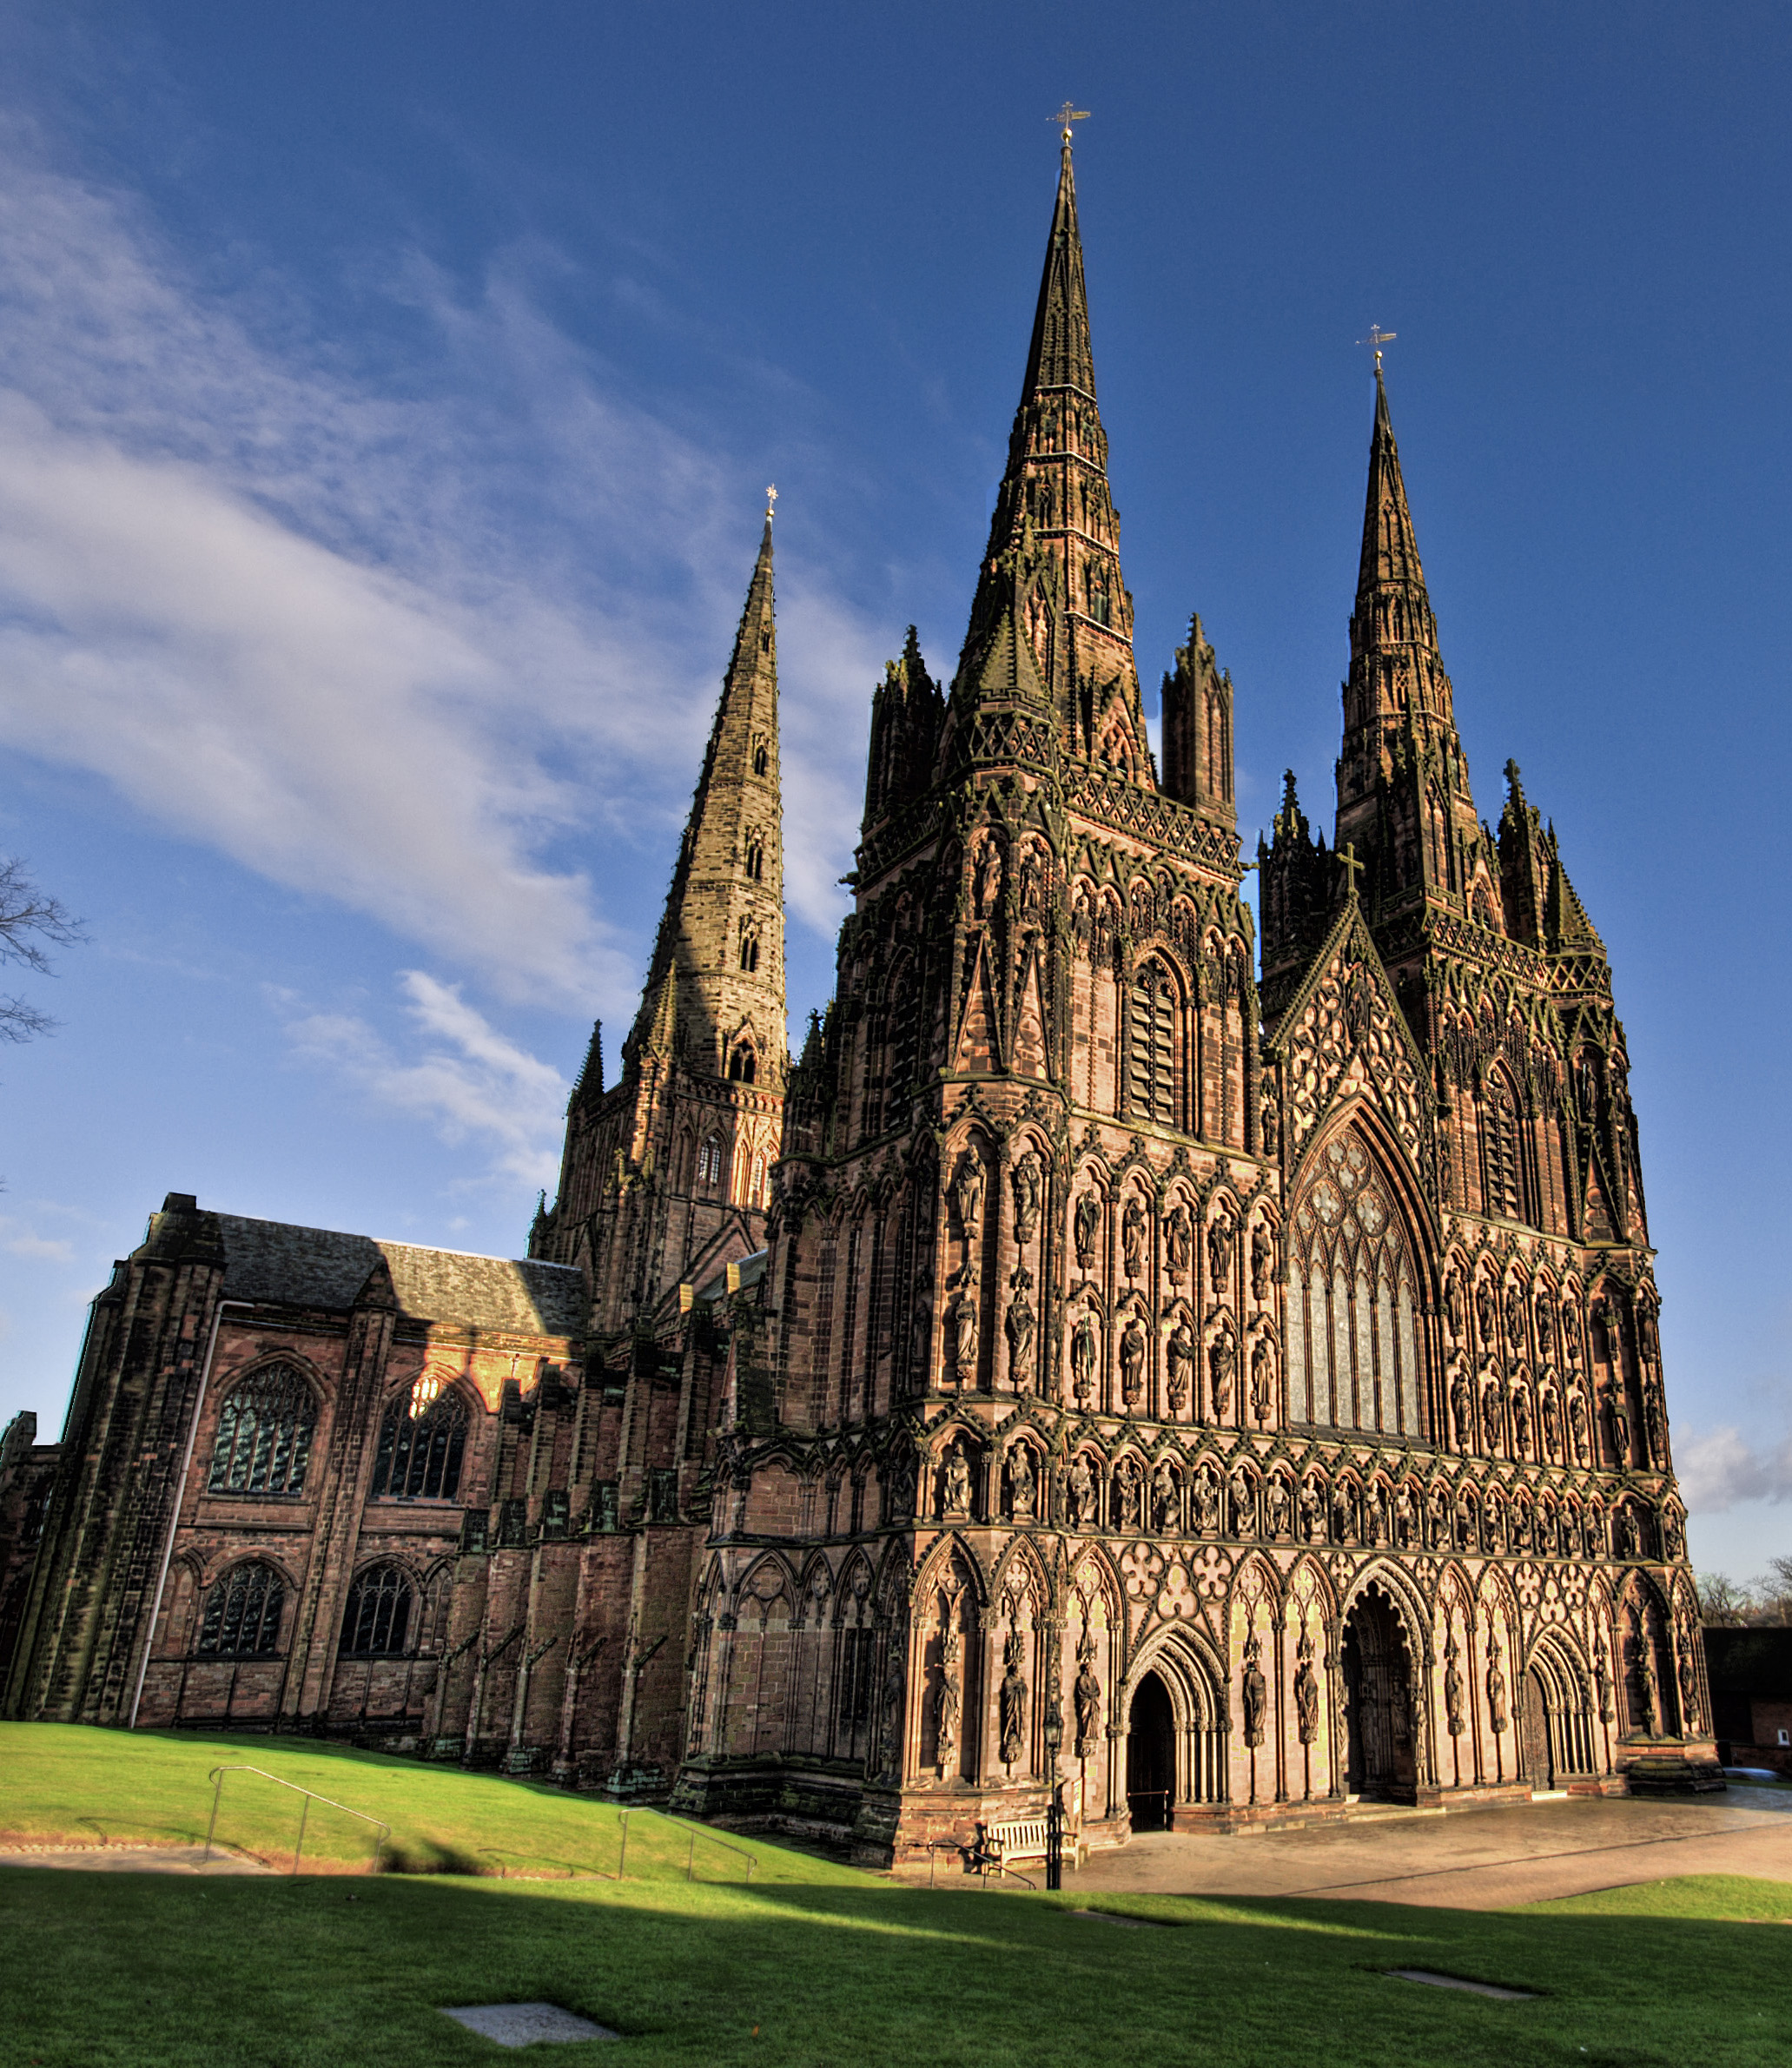 Lichfield Cathedral in Wales, where the St. Chad Gospels are housed.